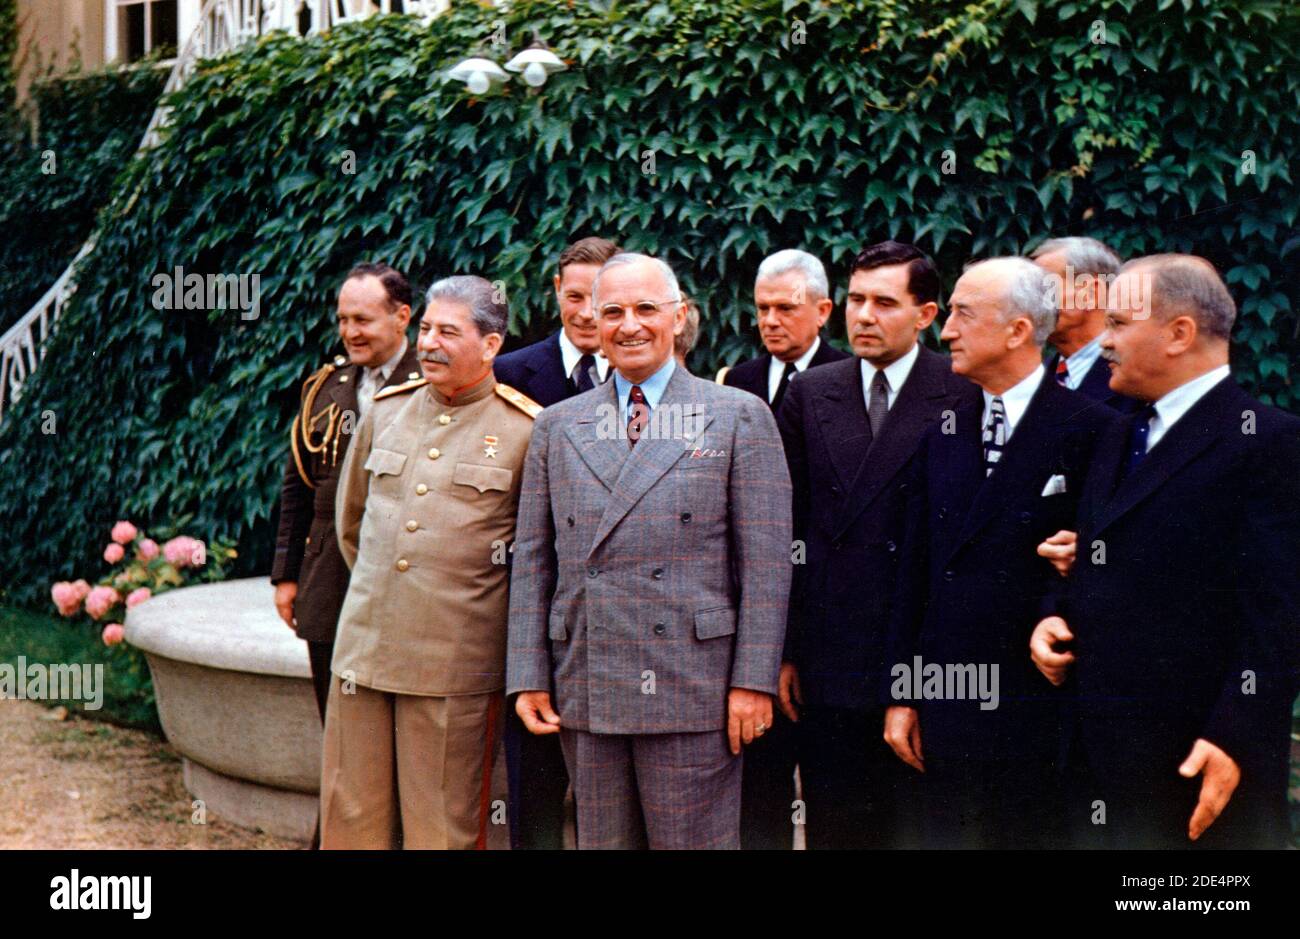 Harry S. Truman and Joseph Stalin meeting at Potsdam. From left to right, row 1 : Joseph Stalin, Harry S. Truman, Soviet Ambassador Andrei Gromyko, Secretary of State James Byrnes, and Soviet Foreign Minister Vyacheslav Molotov. Second row: General Harry Vaughan, interpreter Charles Bohlen, interpreter V. N. Pavlov (mostly obscured by Truman), Captain James K. Vardaman, and Charles Ross (partially obscured), 18 July 1945 Stock Photo